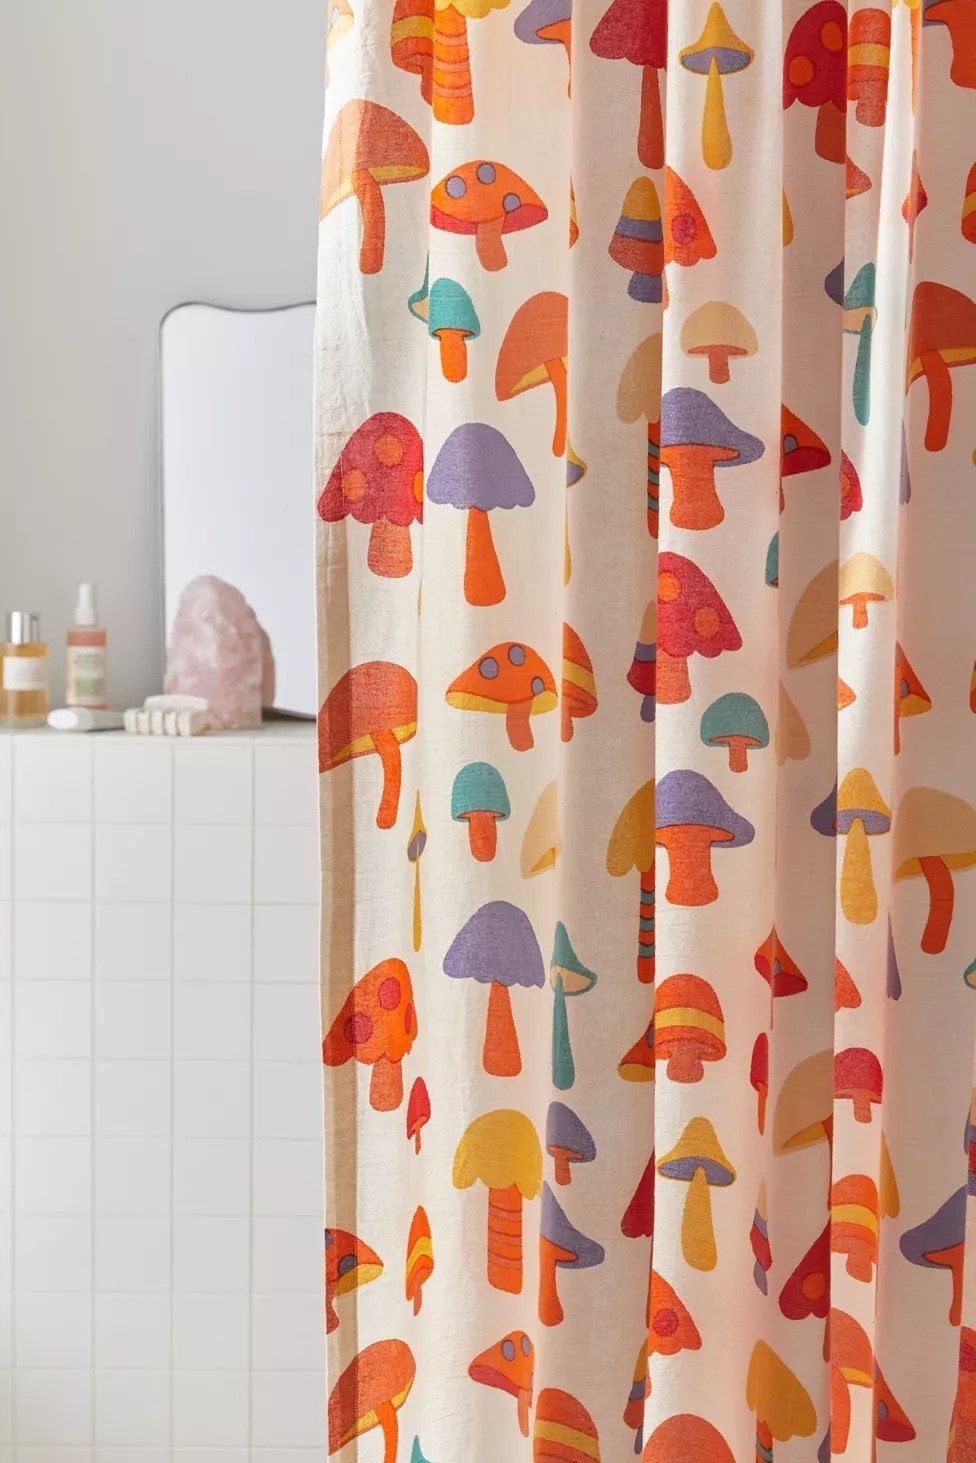 multi-colored mushroom pattern on a shower curtain in a white tile bathroom